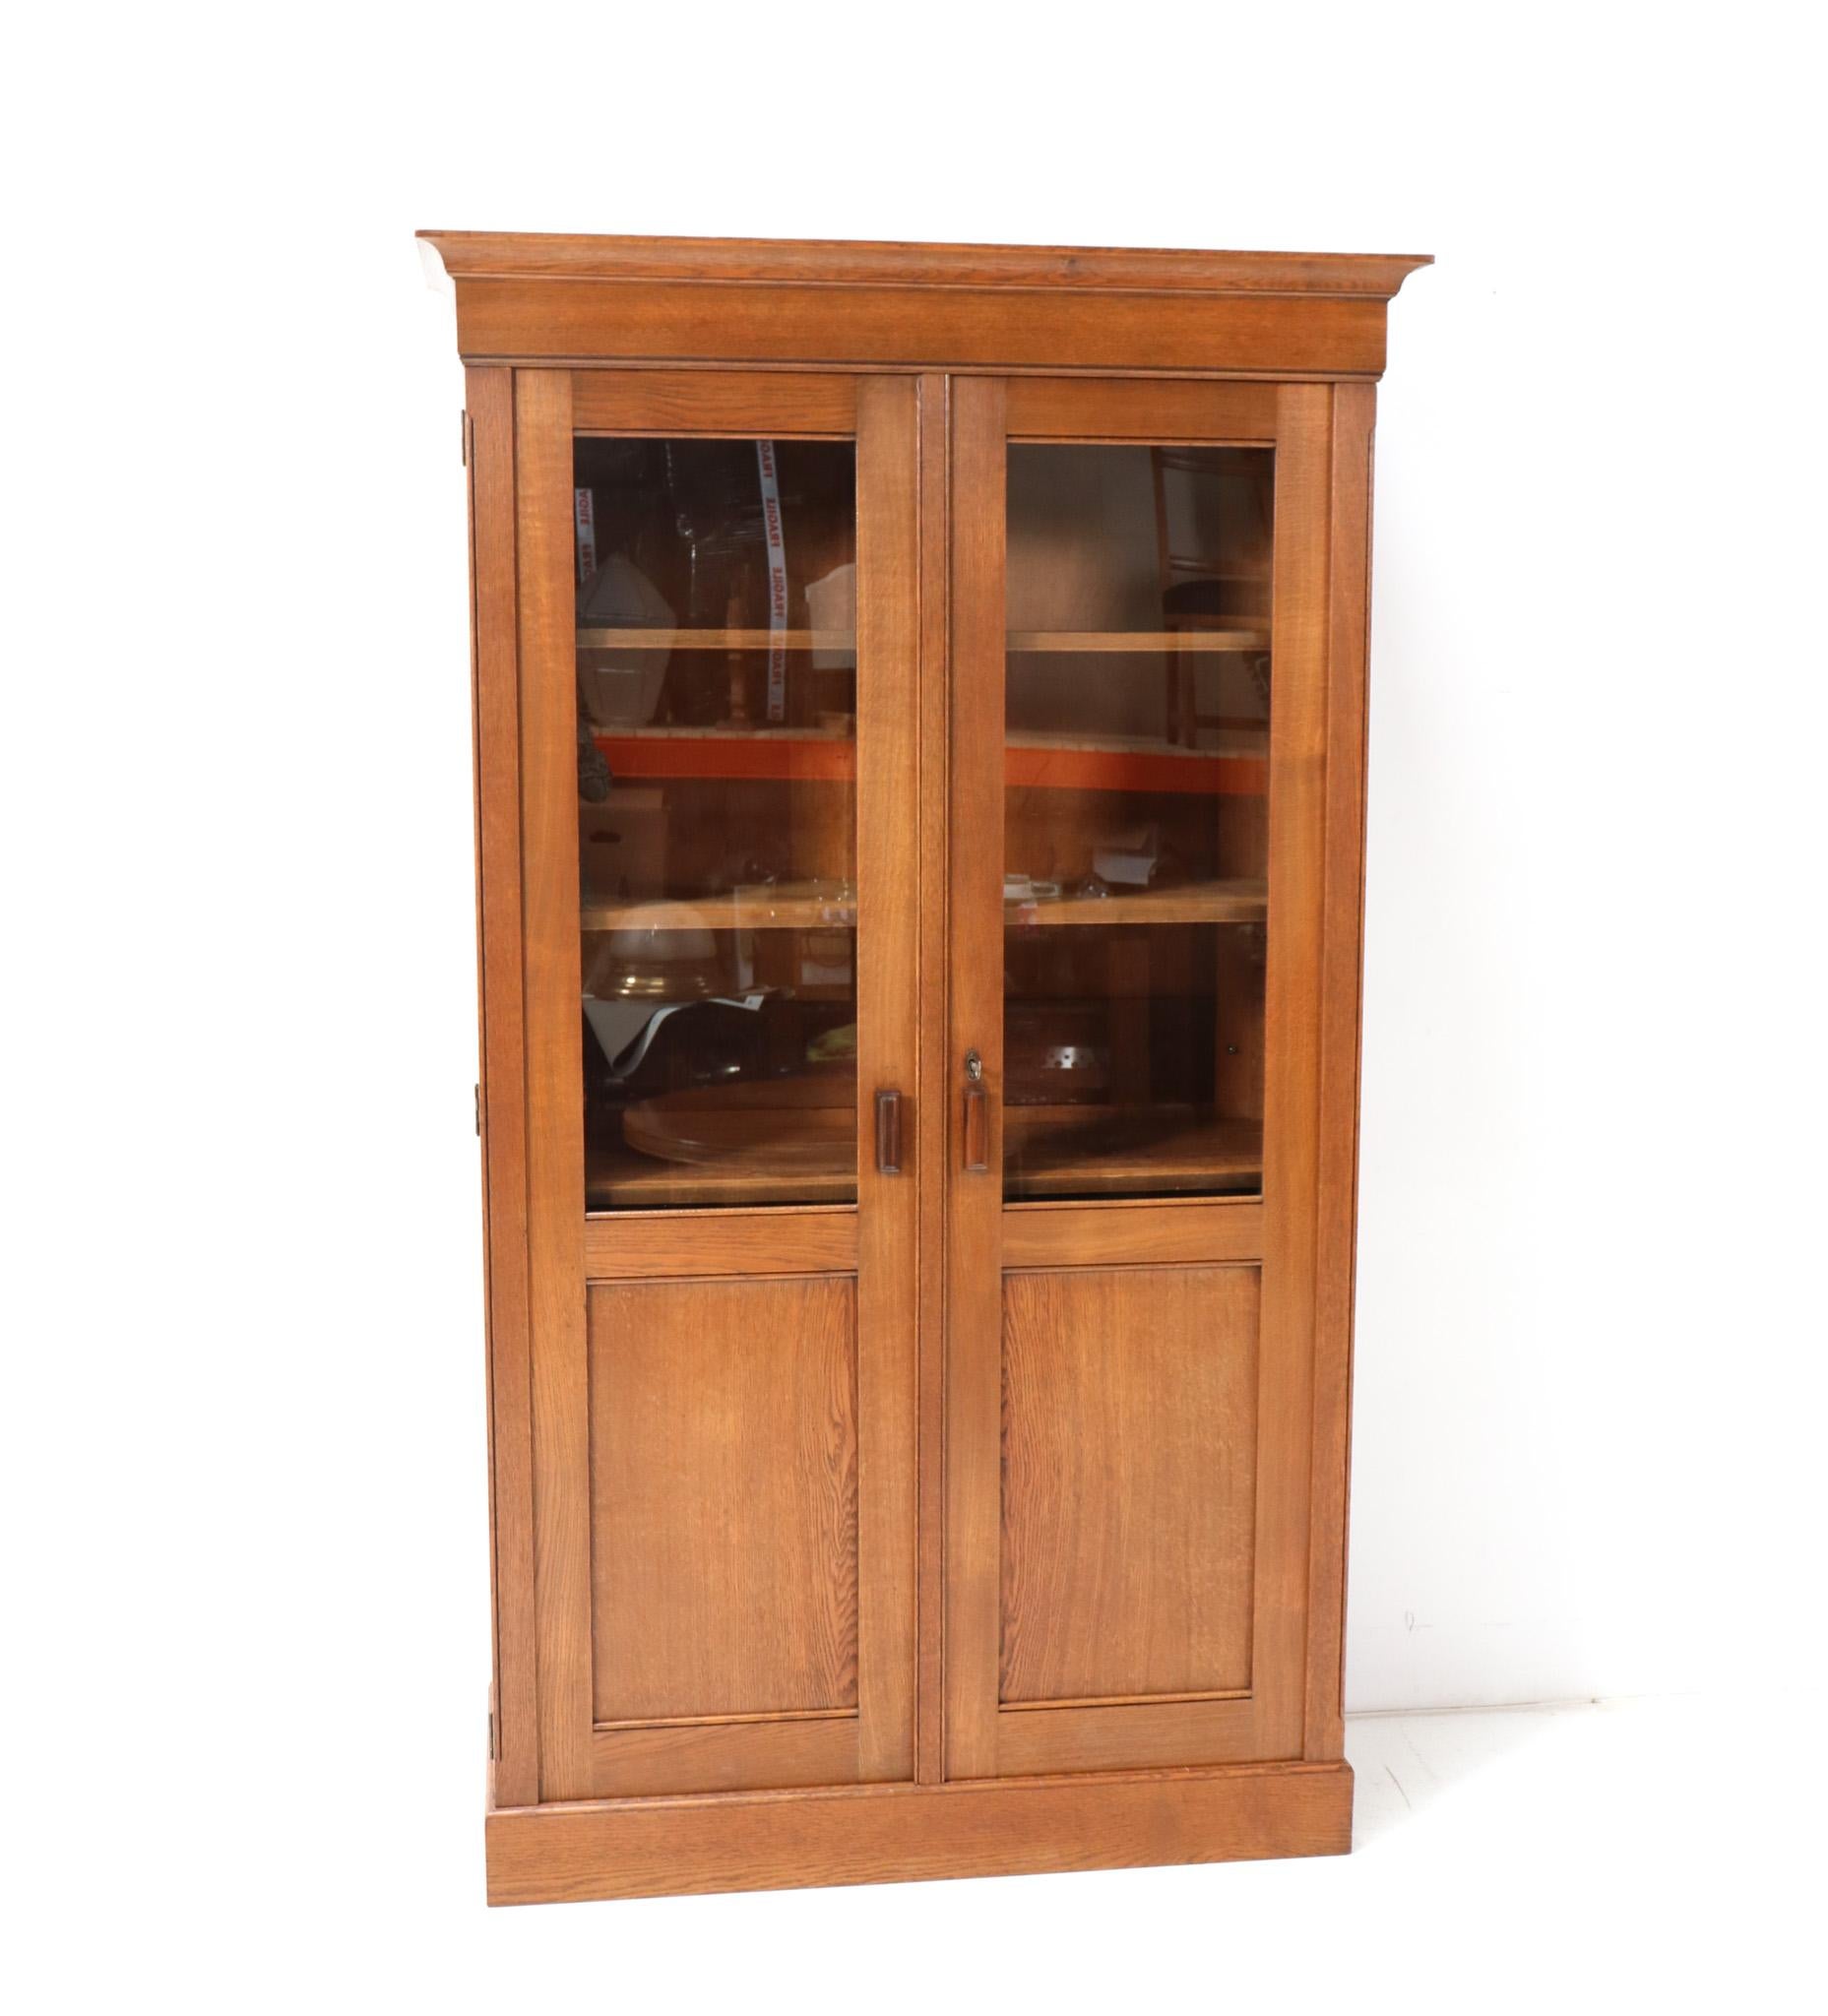 Stunning and rare Art Deco Modernist bookcase.
Striking Dutch design from the 1920s.
Solid oak with original macassar ebony handles on both doors.
The backside panels are also made out of solid oak.
Four original solid oak shelves, adjustable in